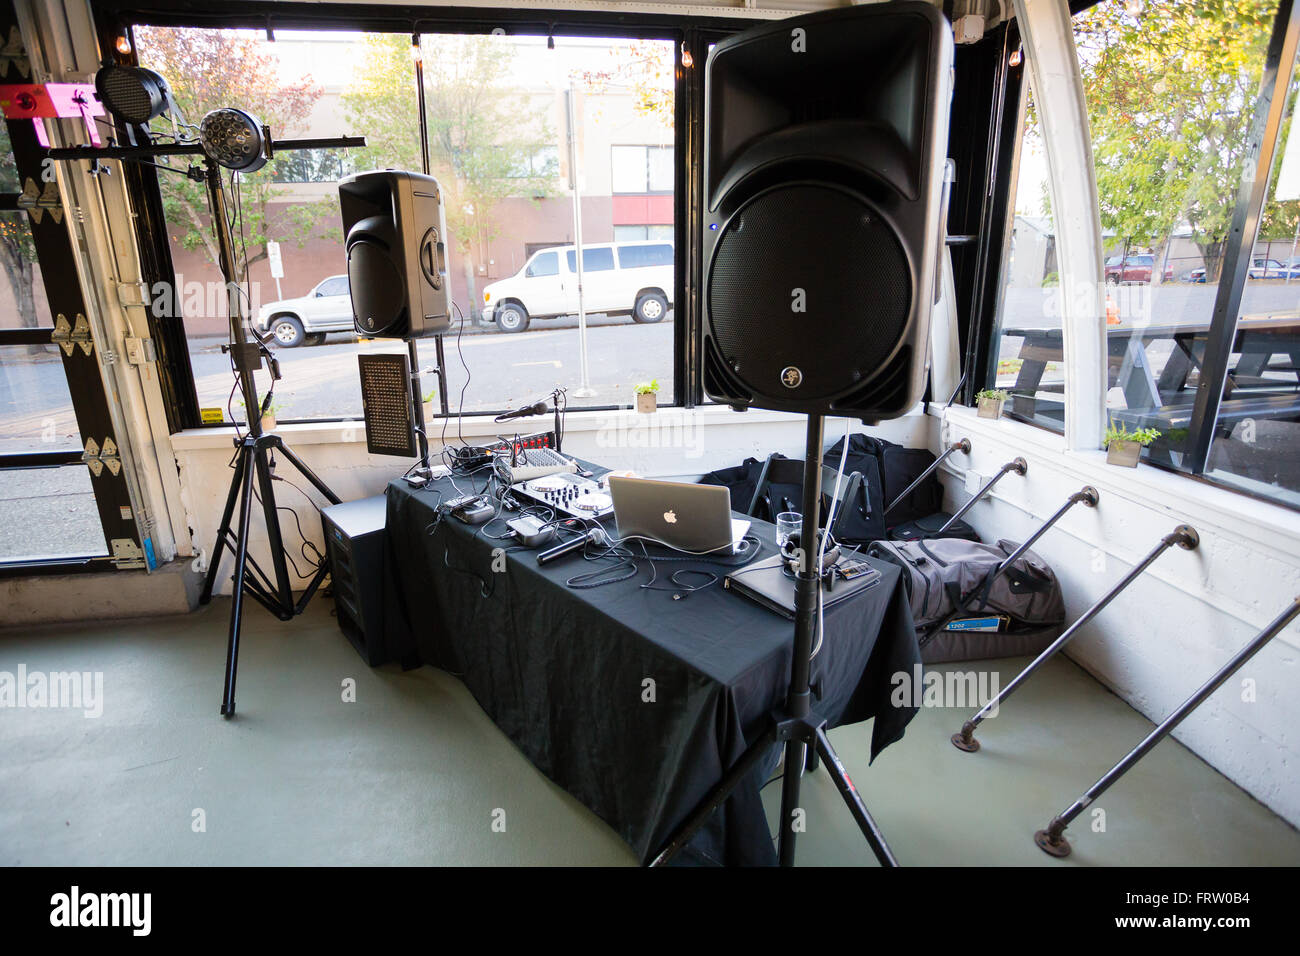 PORTLAND, OR - OCTOBER 24, 2015: DJ equipment setup and ready of a wedding reception at Cooper's Hall in Portland. Stock Photo